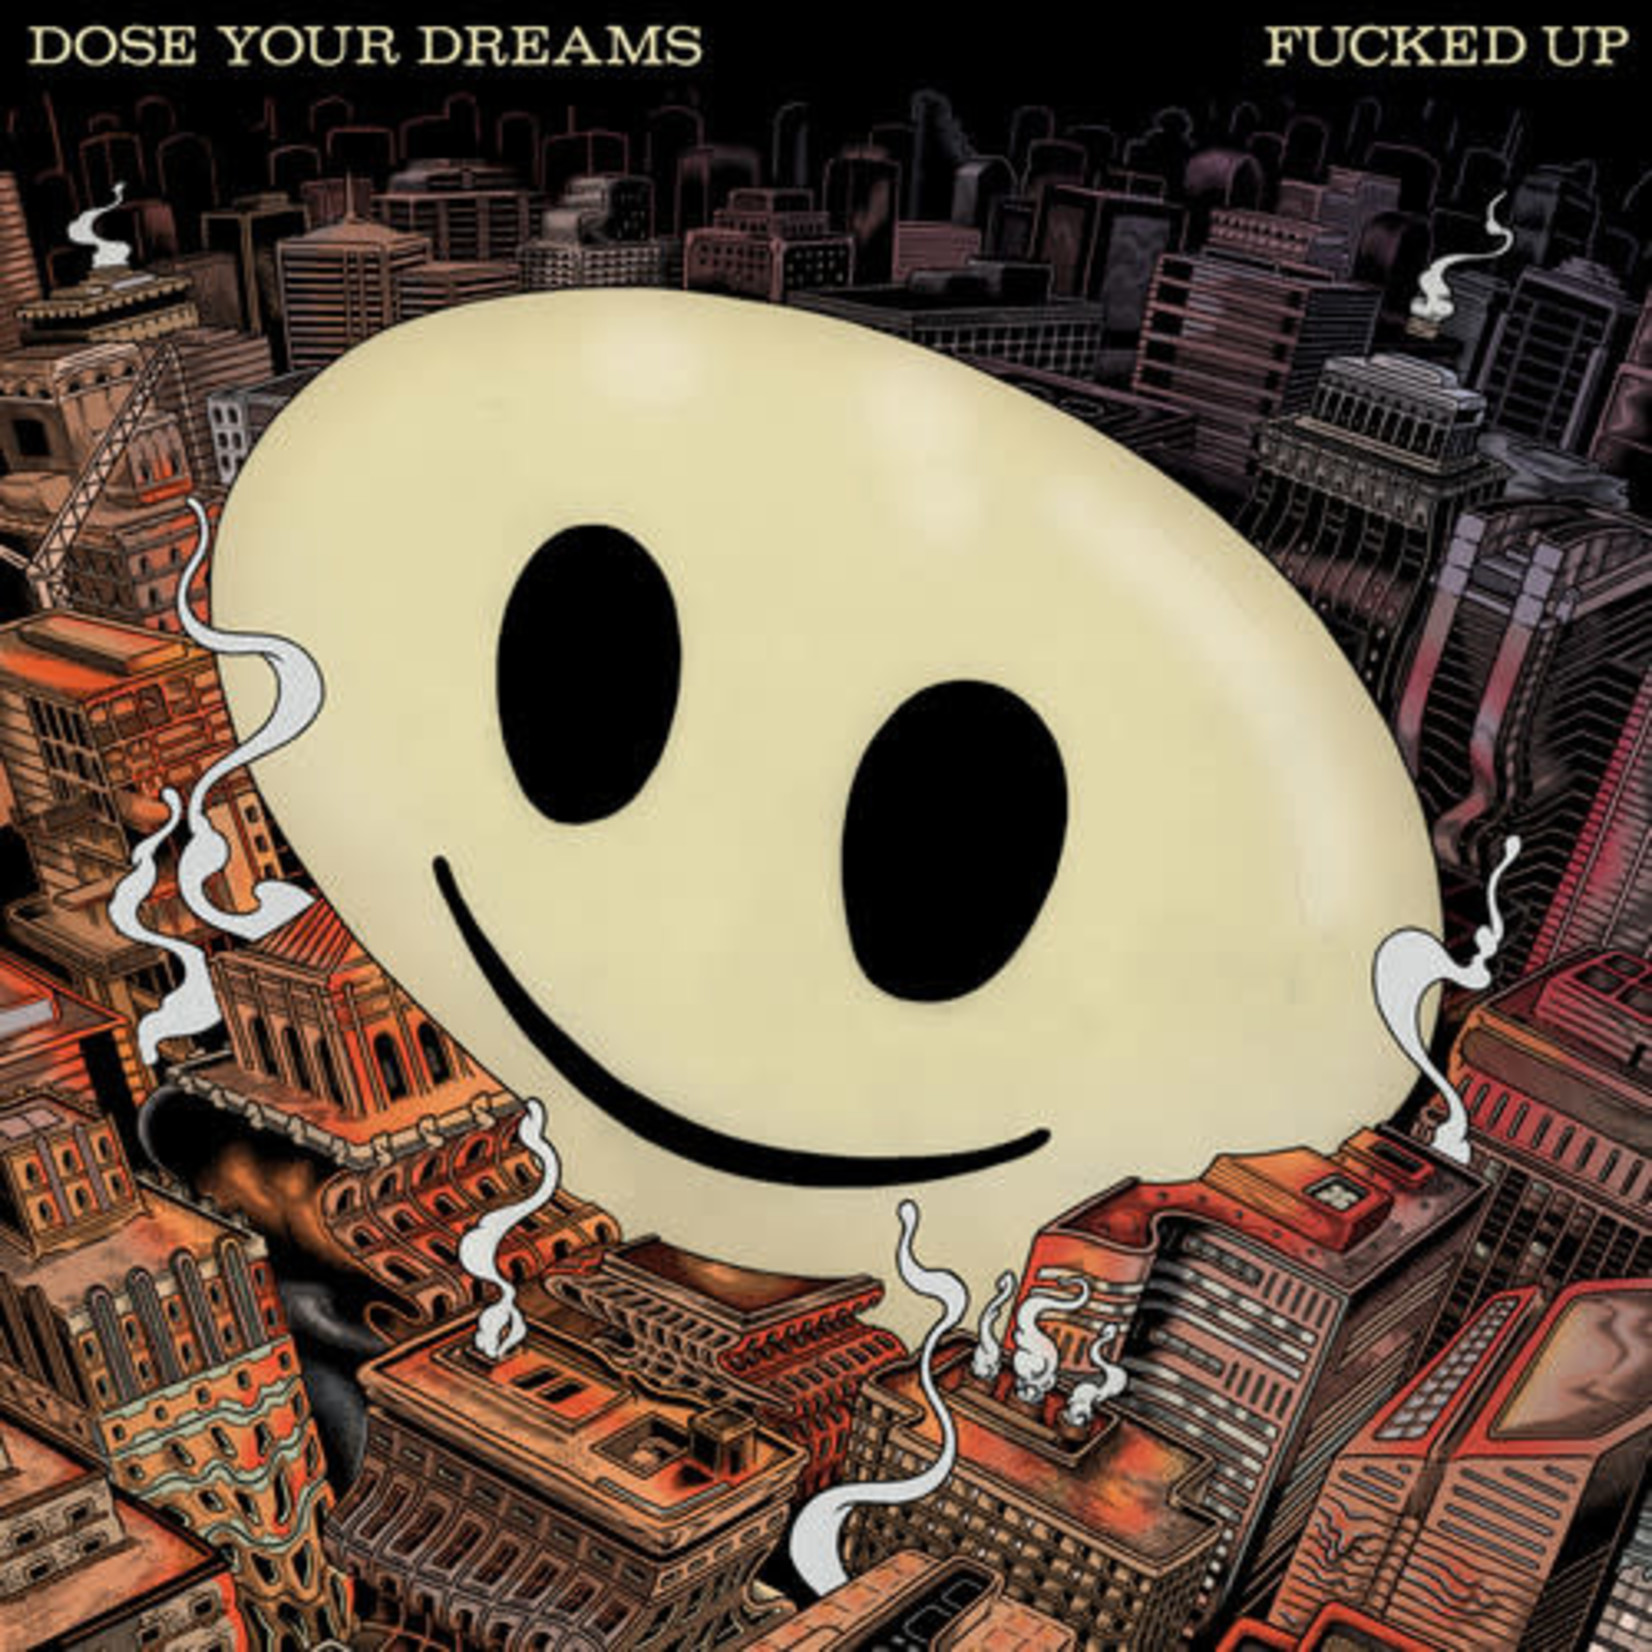 Merge Fucked Up - Dose Your Dreams (2LP)